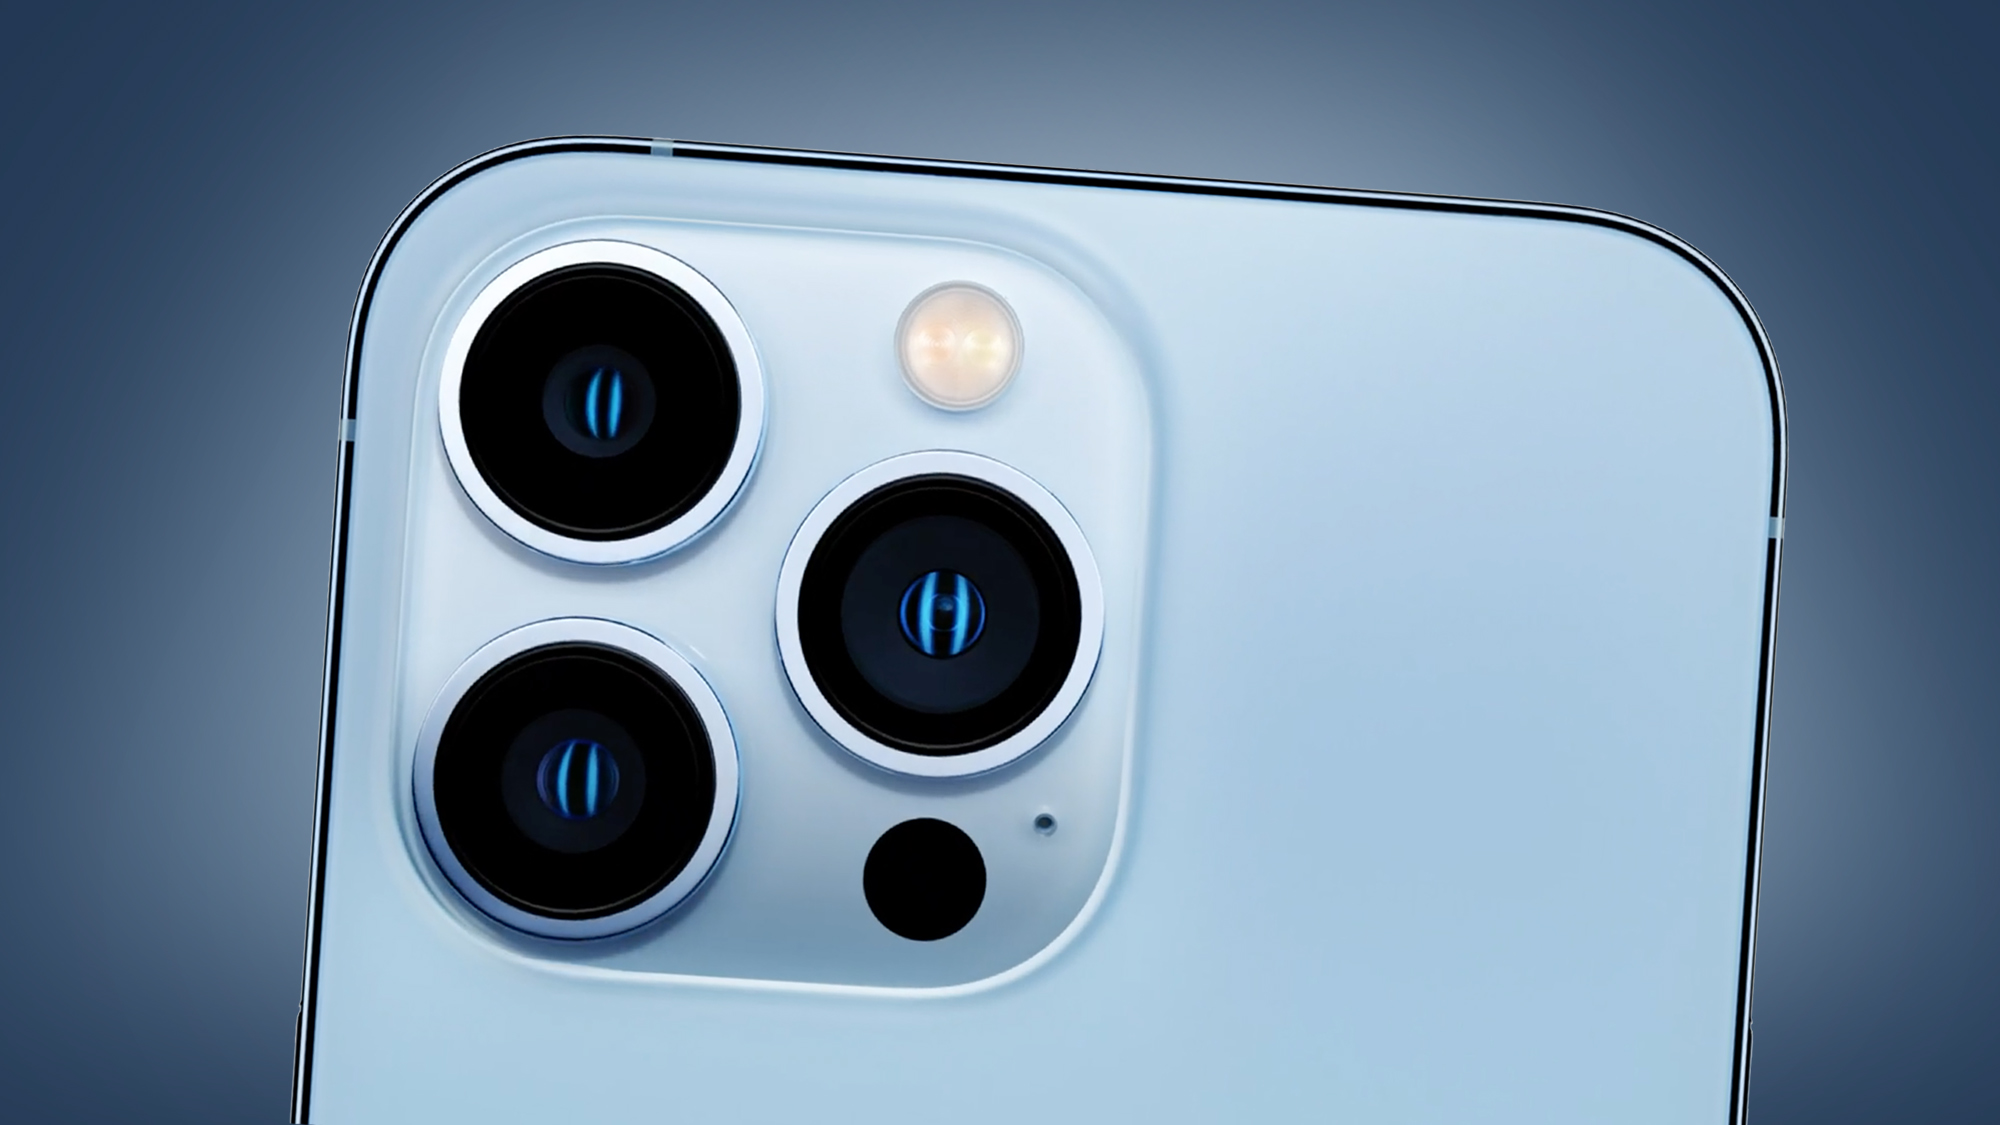 The iPhone 13 Pro's rear cameras